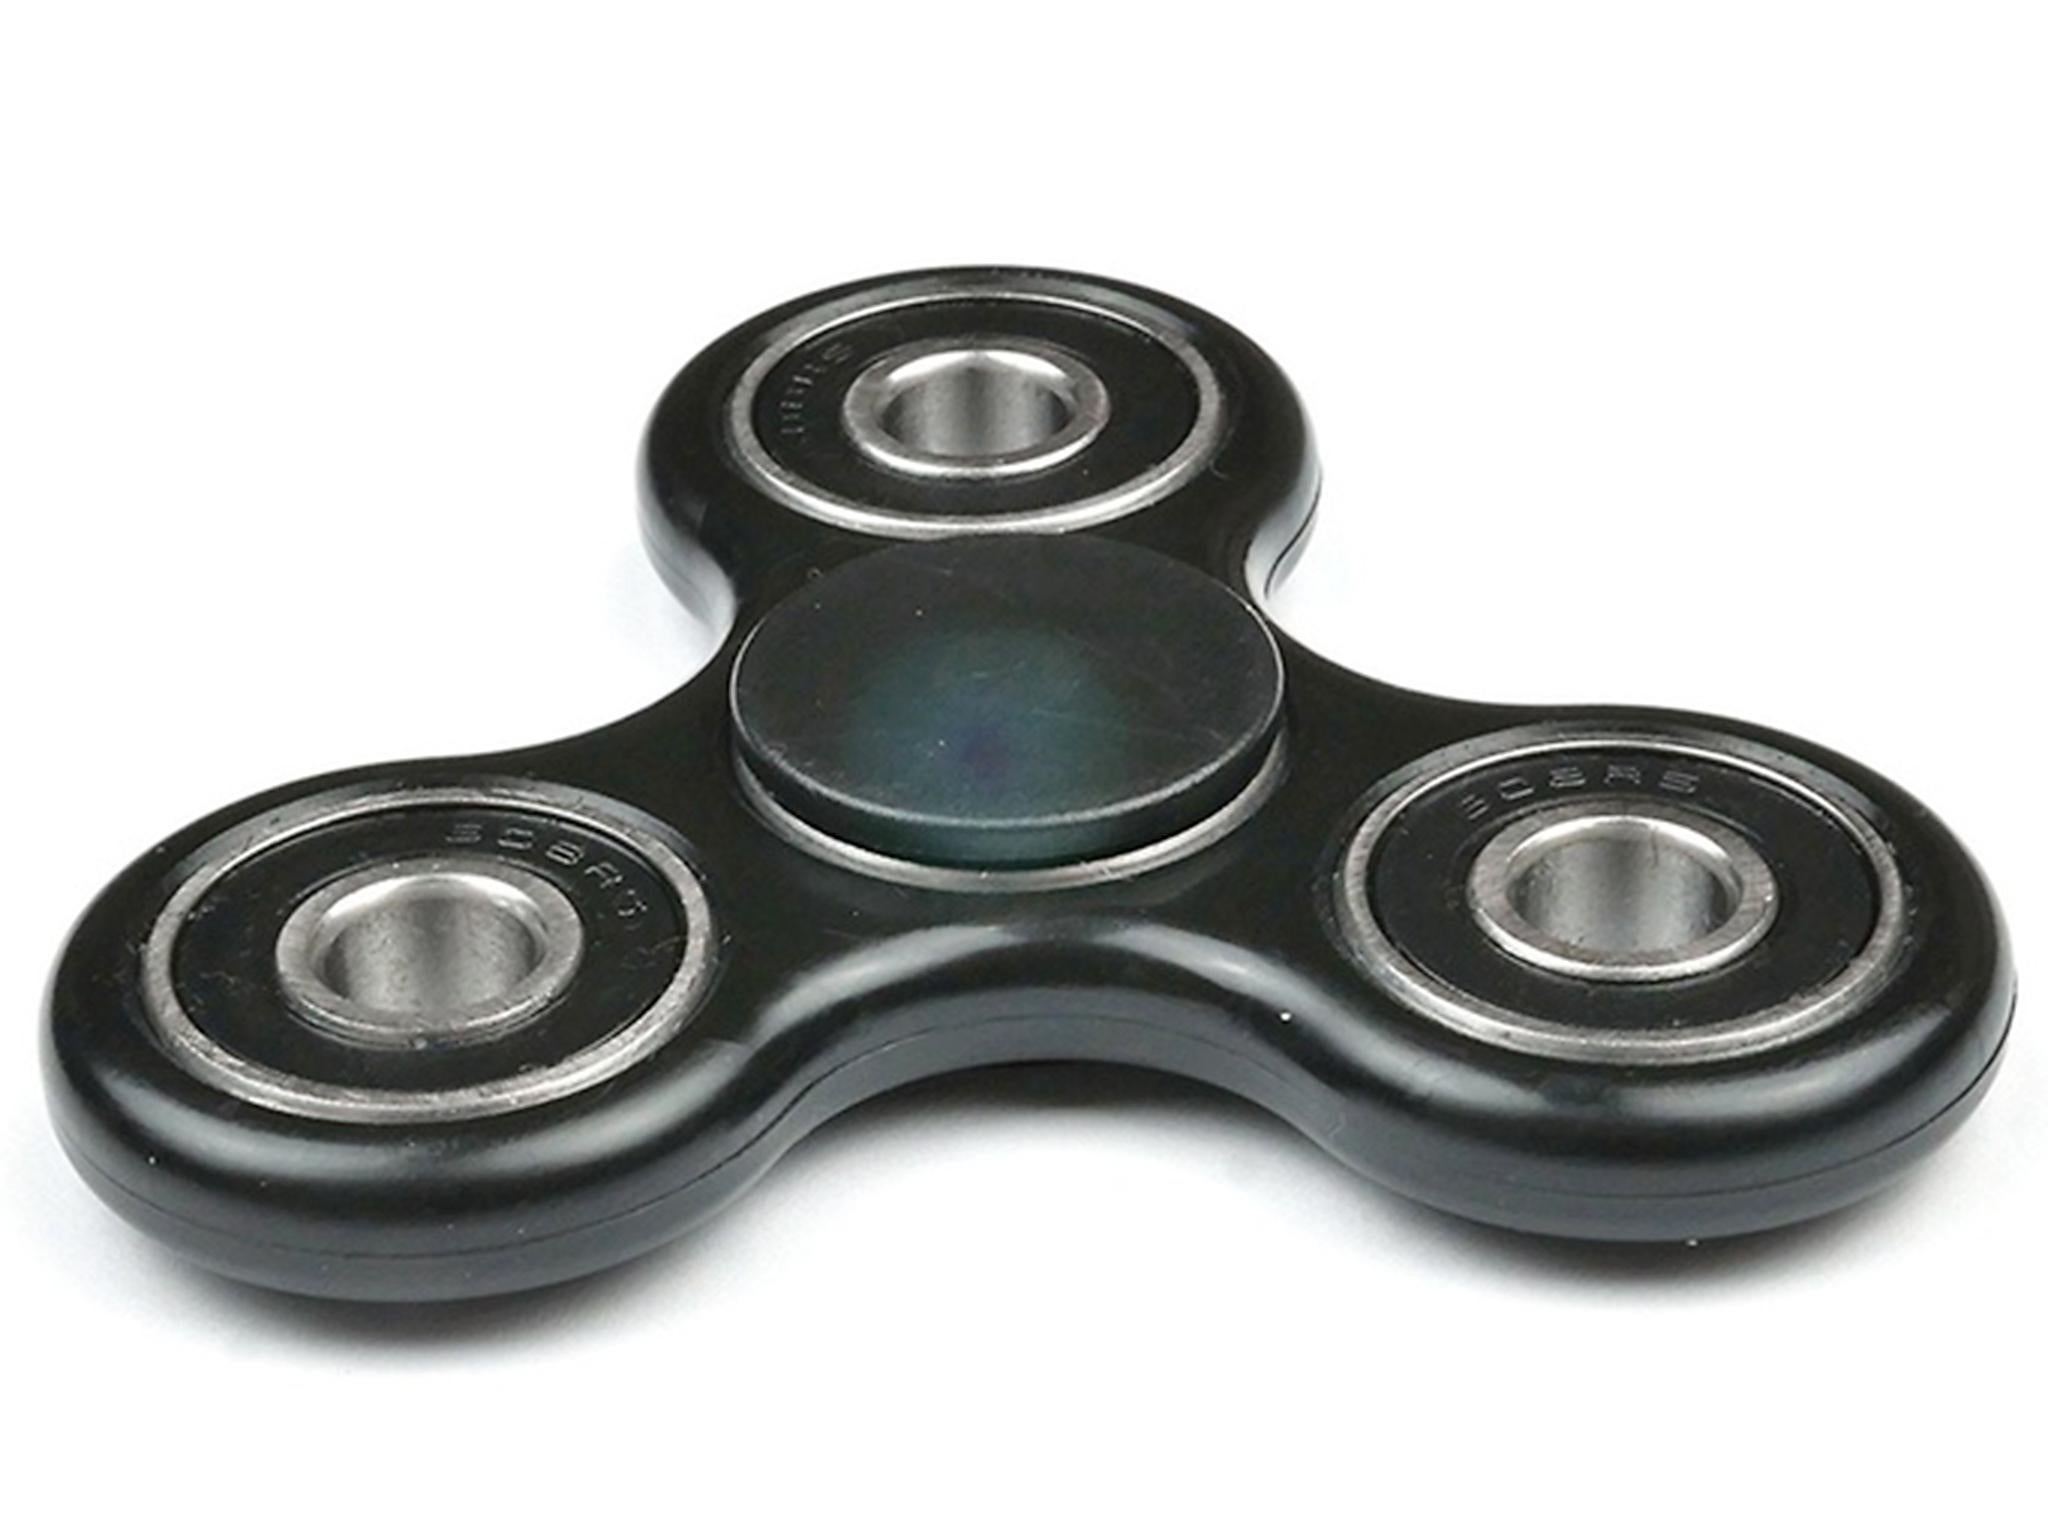 Fidget spinners have taken off in popularity following their use by YouTube bloggers